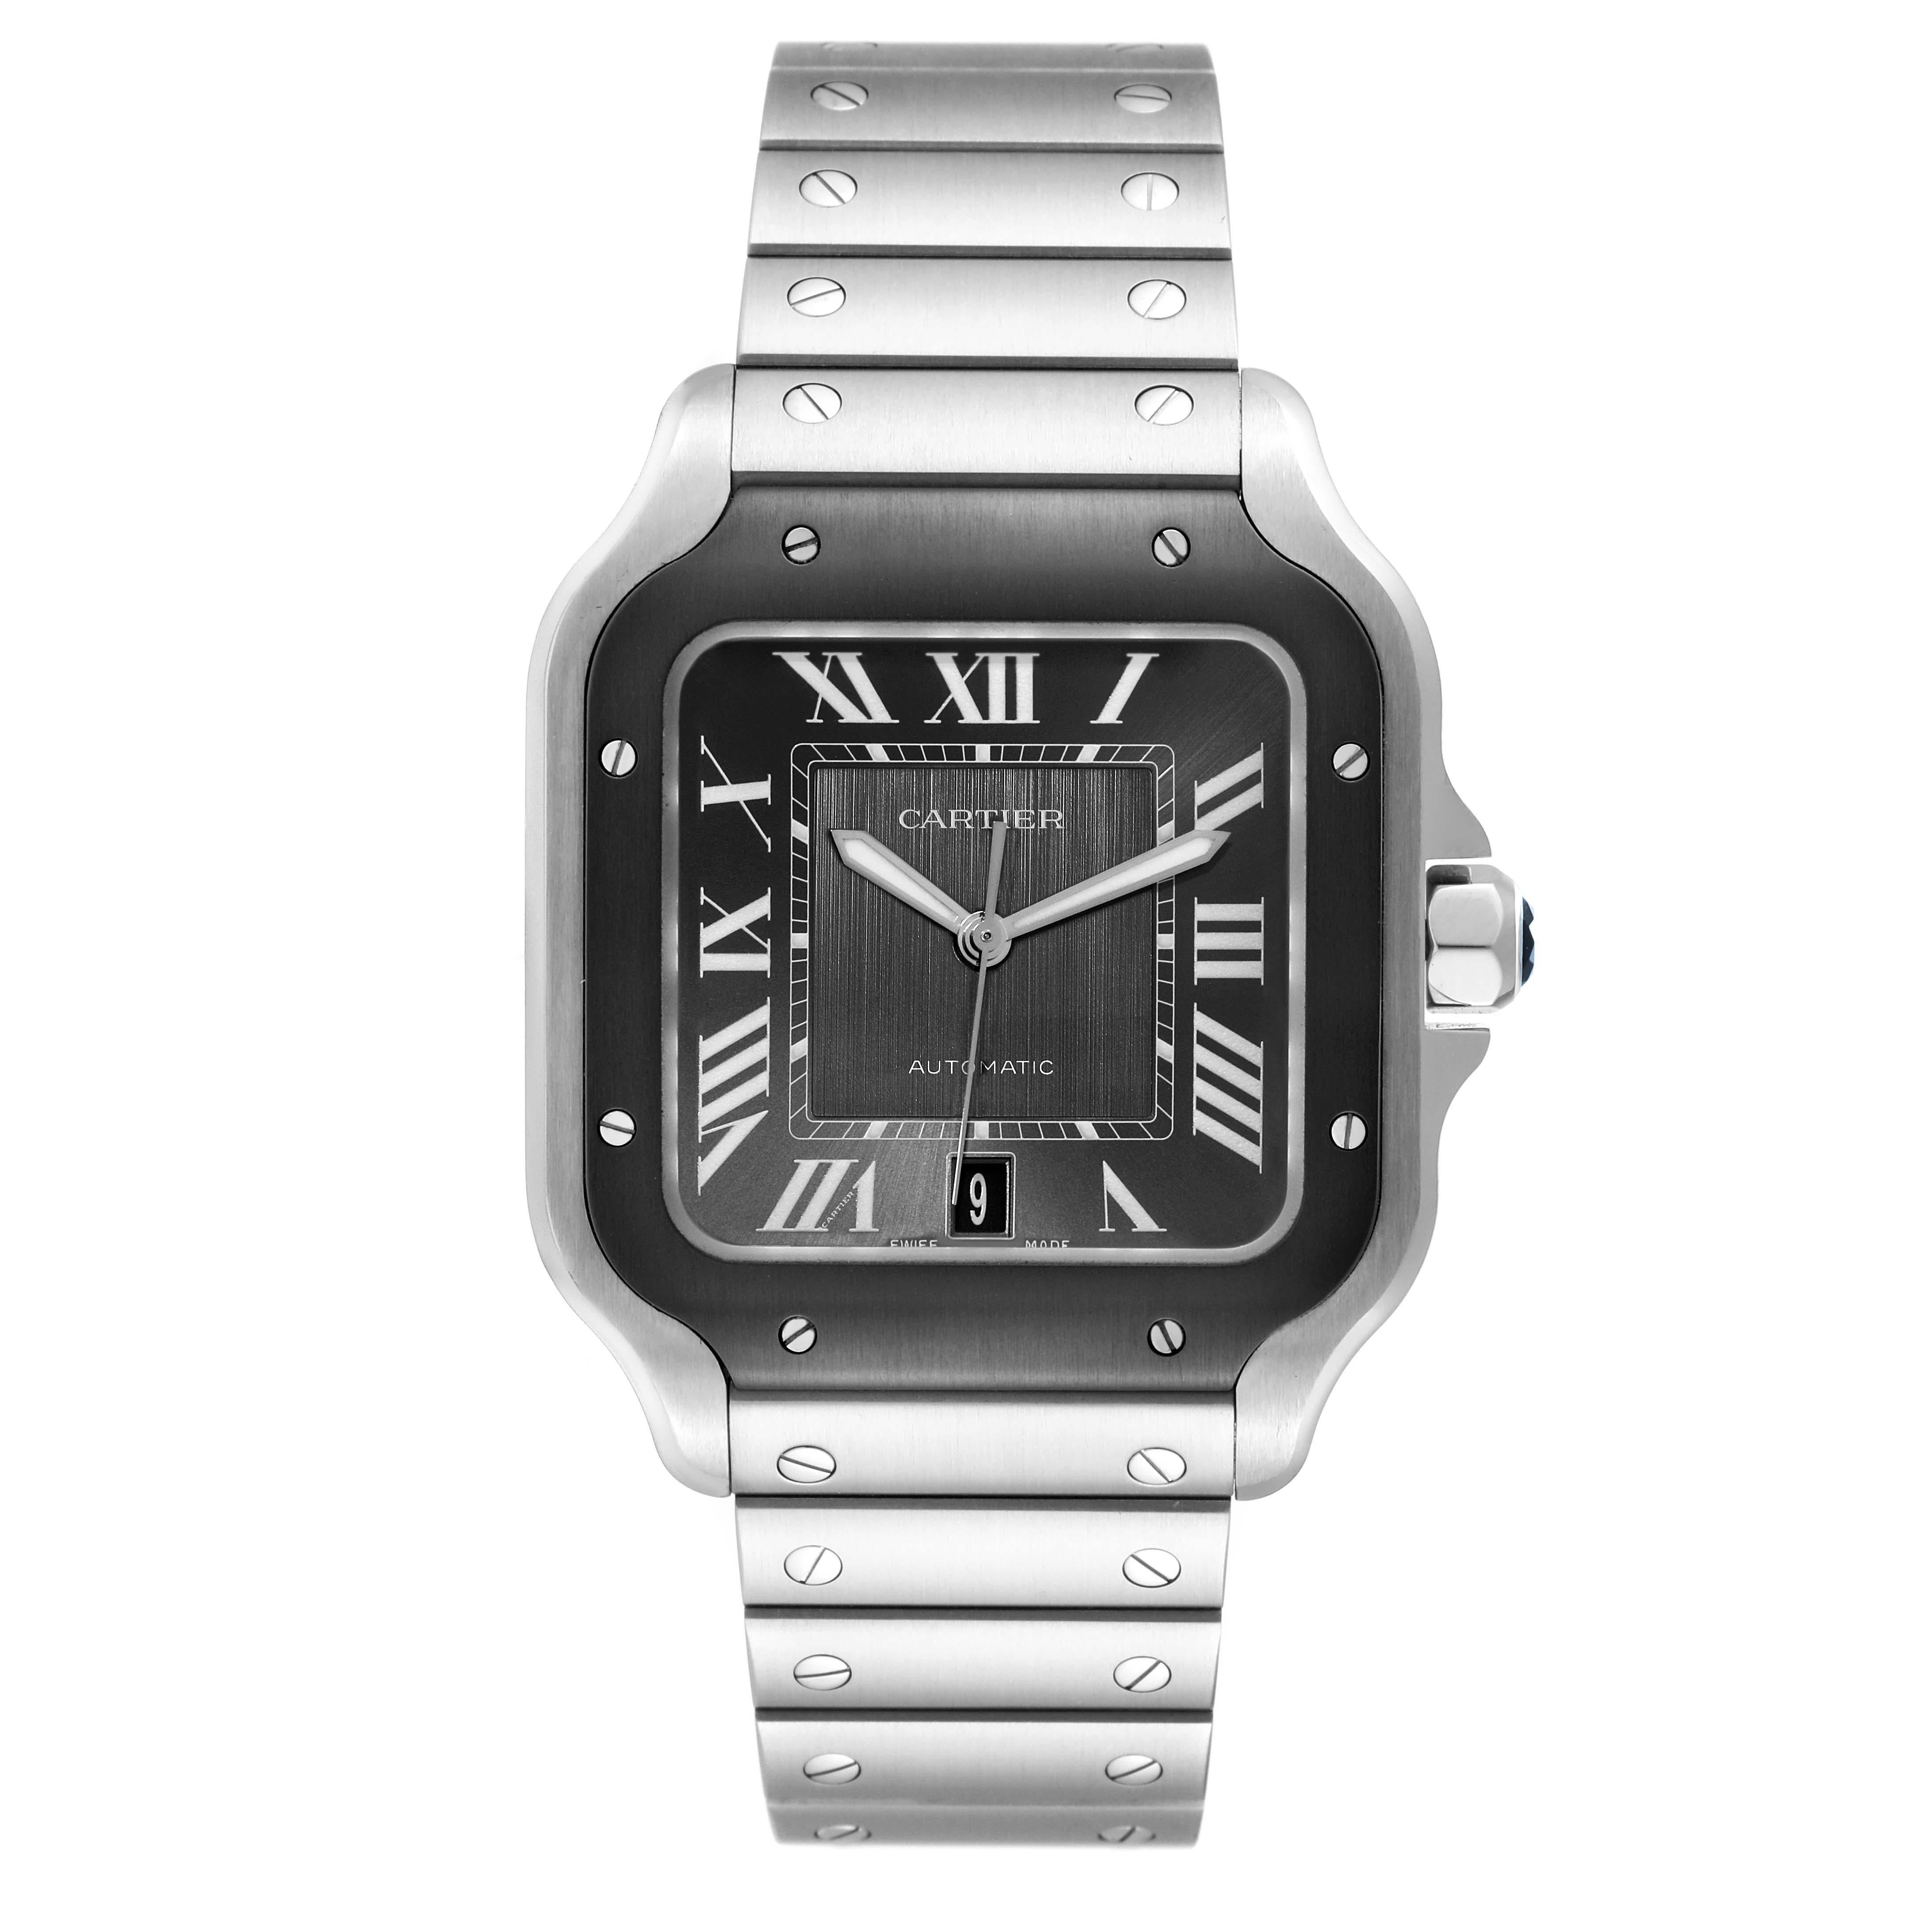 Cartier Santos Steel DLC Grey Dial Mens Watch WSSA0037 Box Card. Automatic self-winding movement. Stainless steel case 39.8 x 47.5 mm. Octagonal crown set with a faceted black spinel. Black ADLC coated brushed stainless steel bezel punctuated with 8